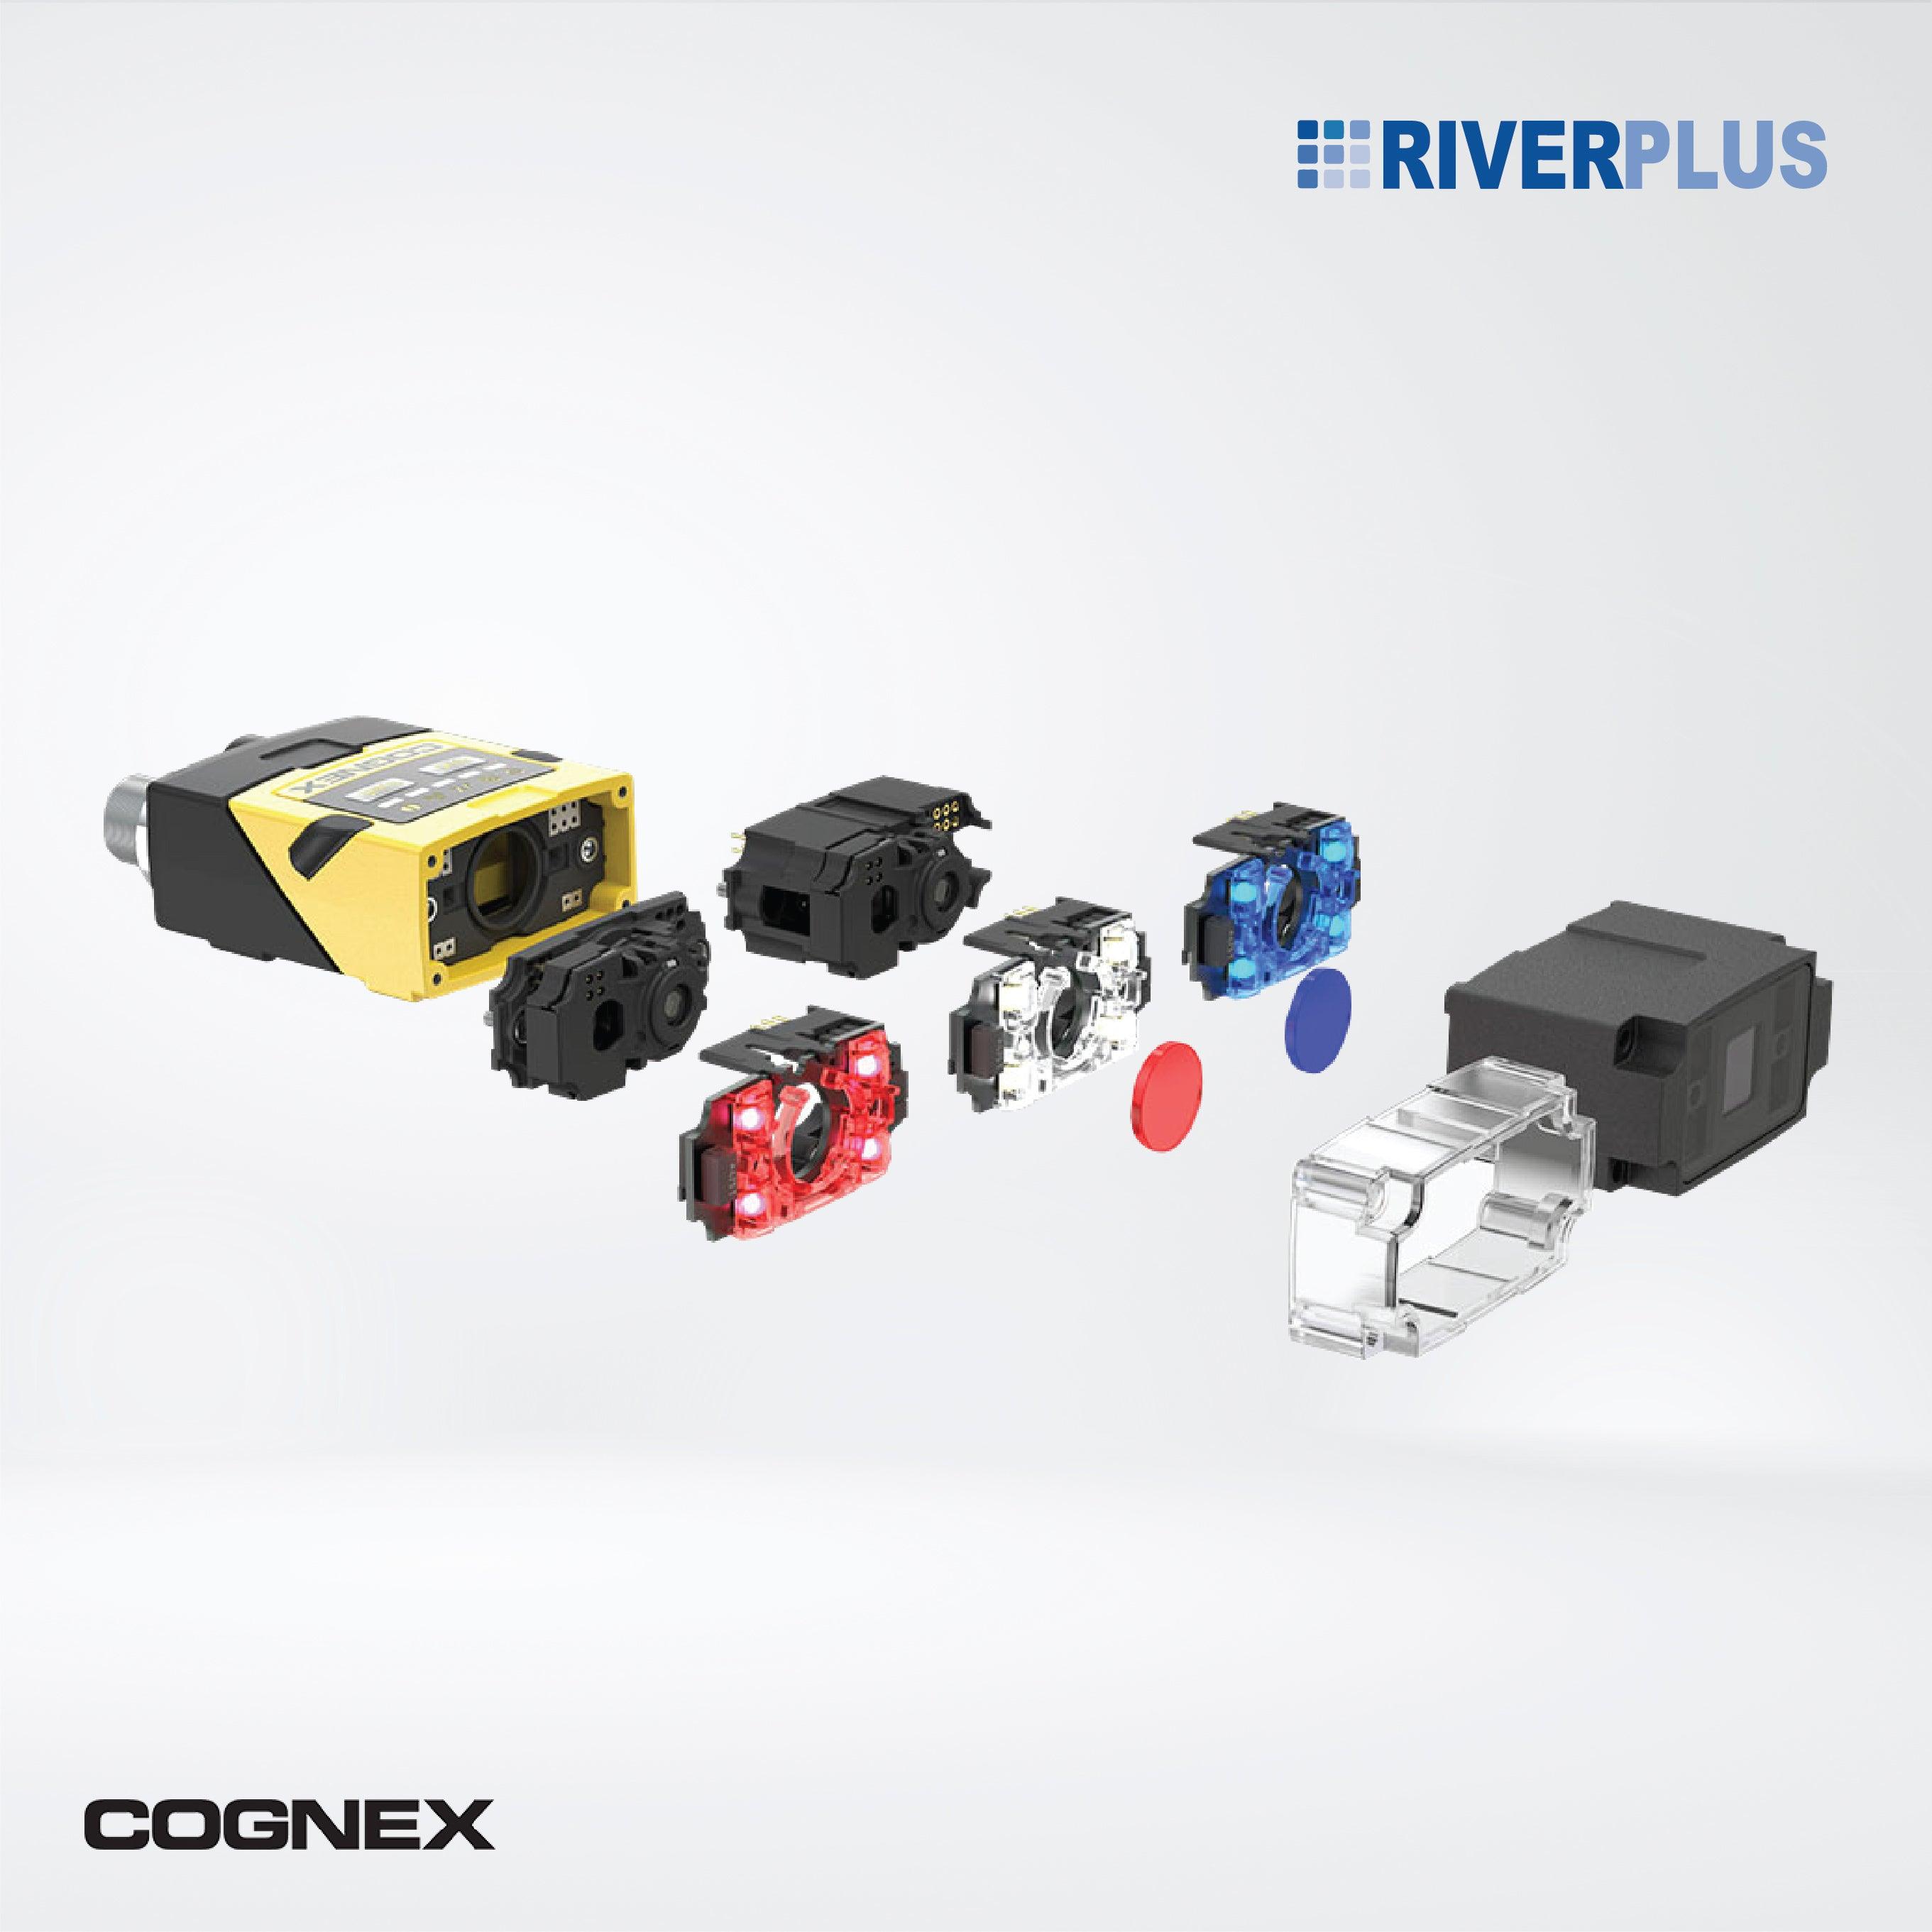 In-Sight 2000 Mini vision sensors , The power of the vision sensor in an ultra-small form factor - Riverplus